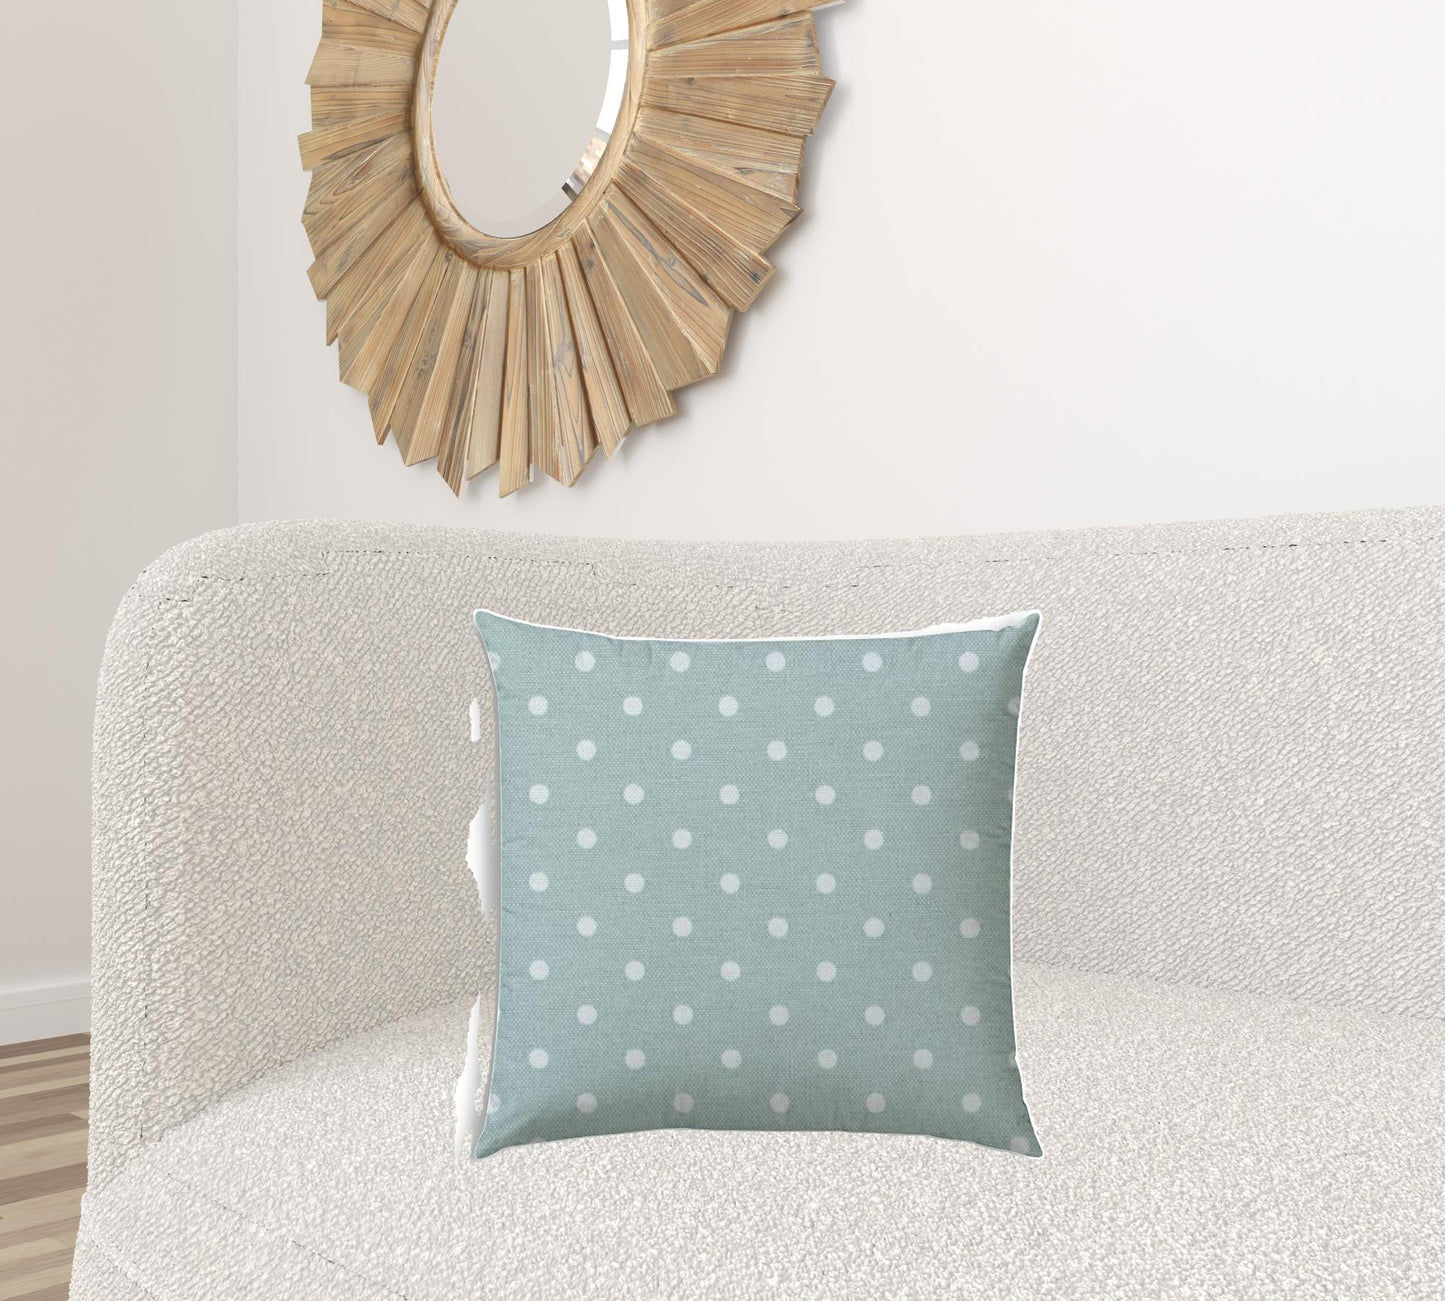 20" X 20" Seafoam And White Blown Seam Polka Dots Throw Indoor Outdoor Pillow